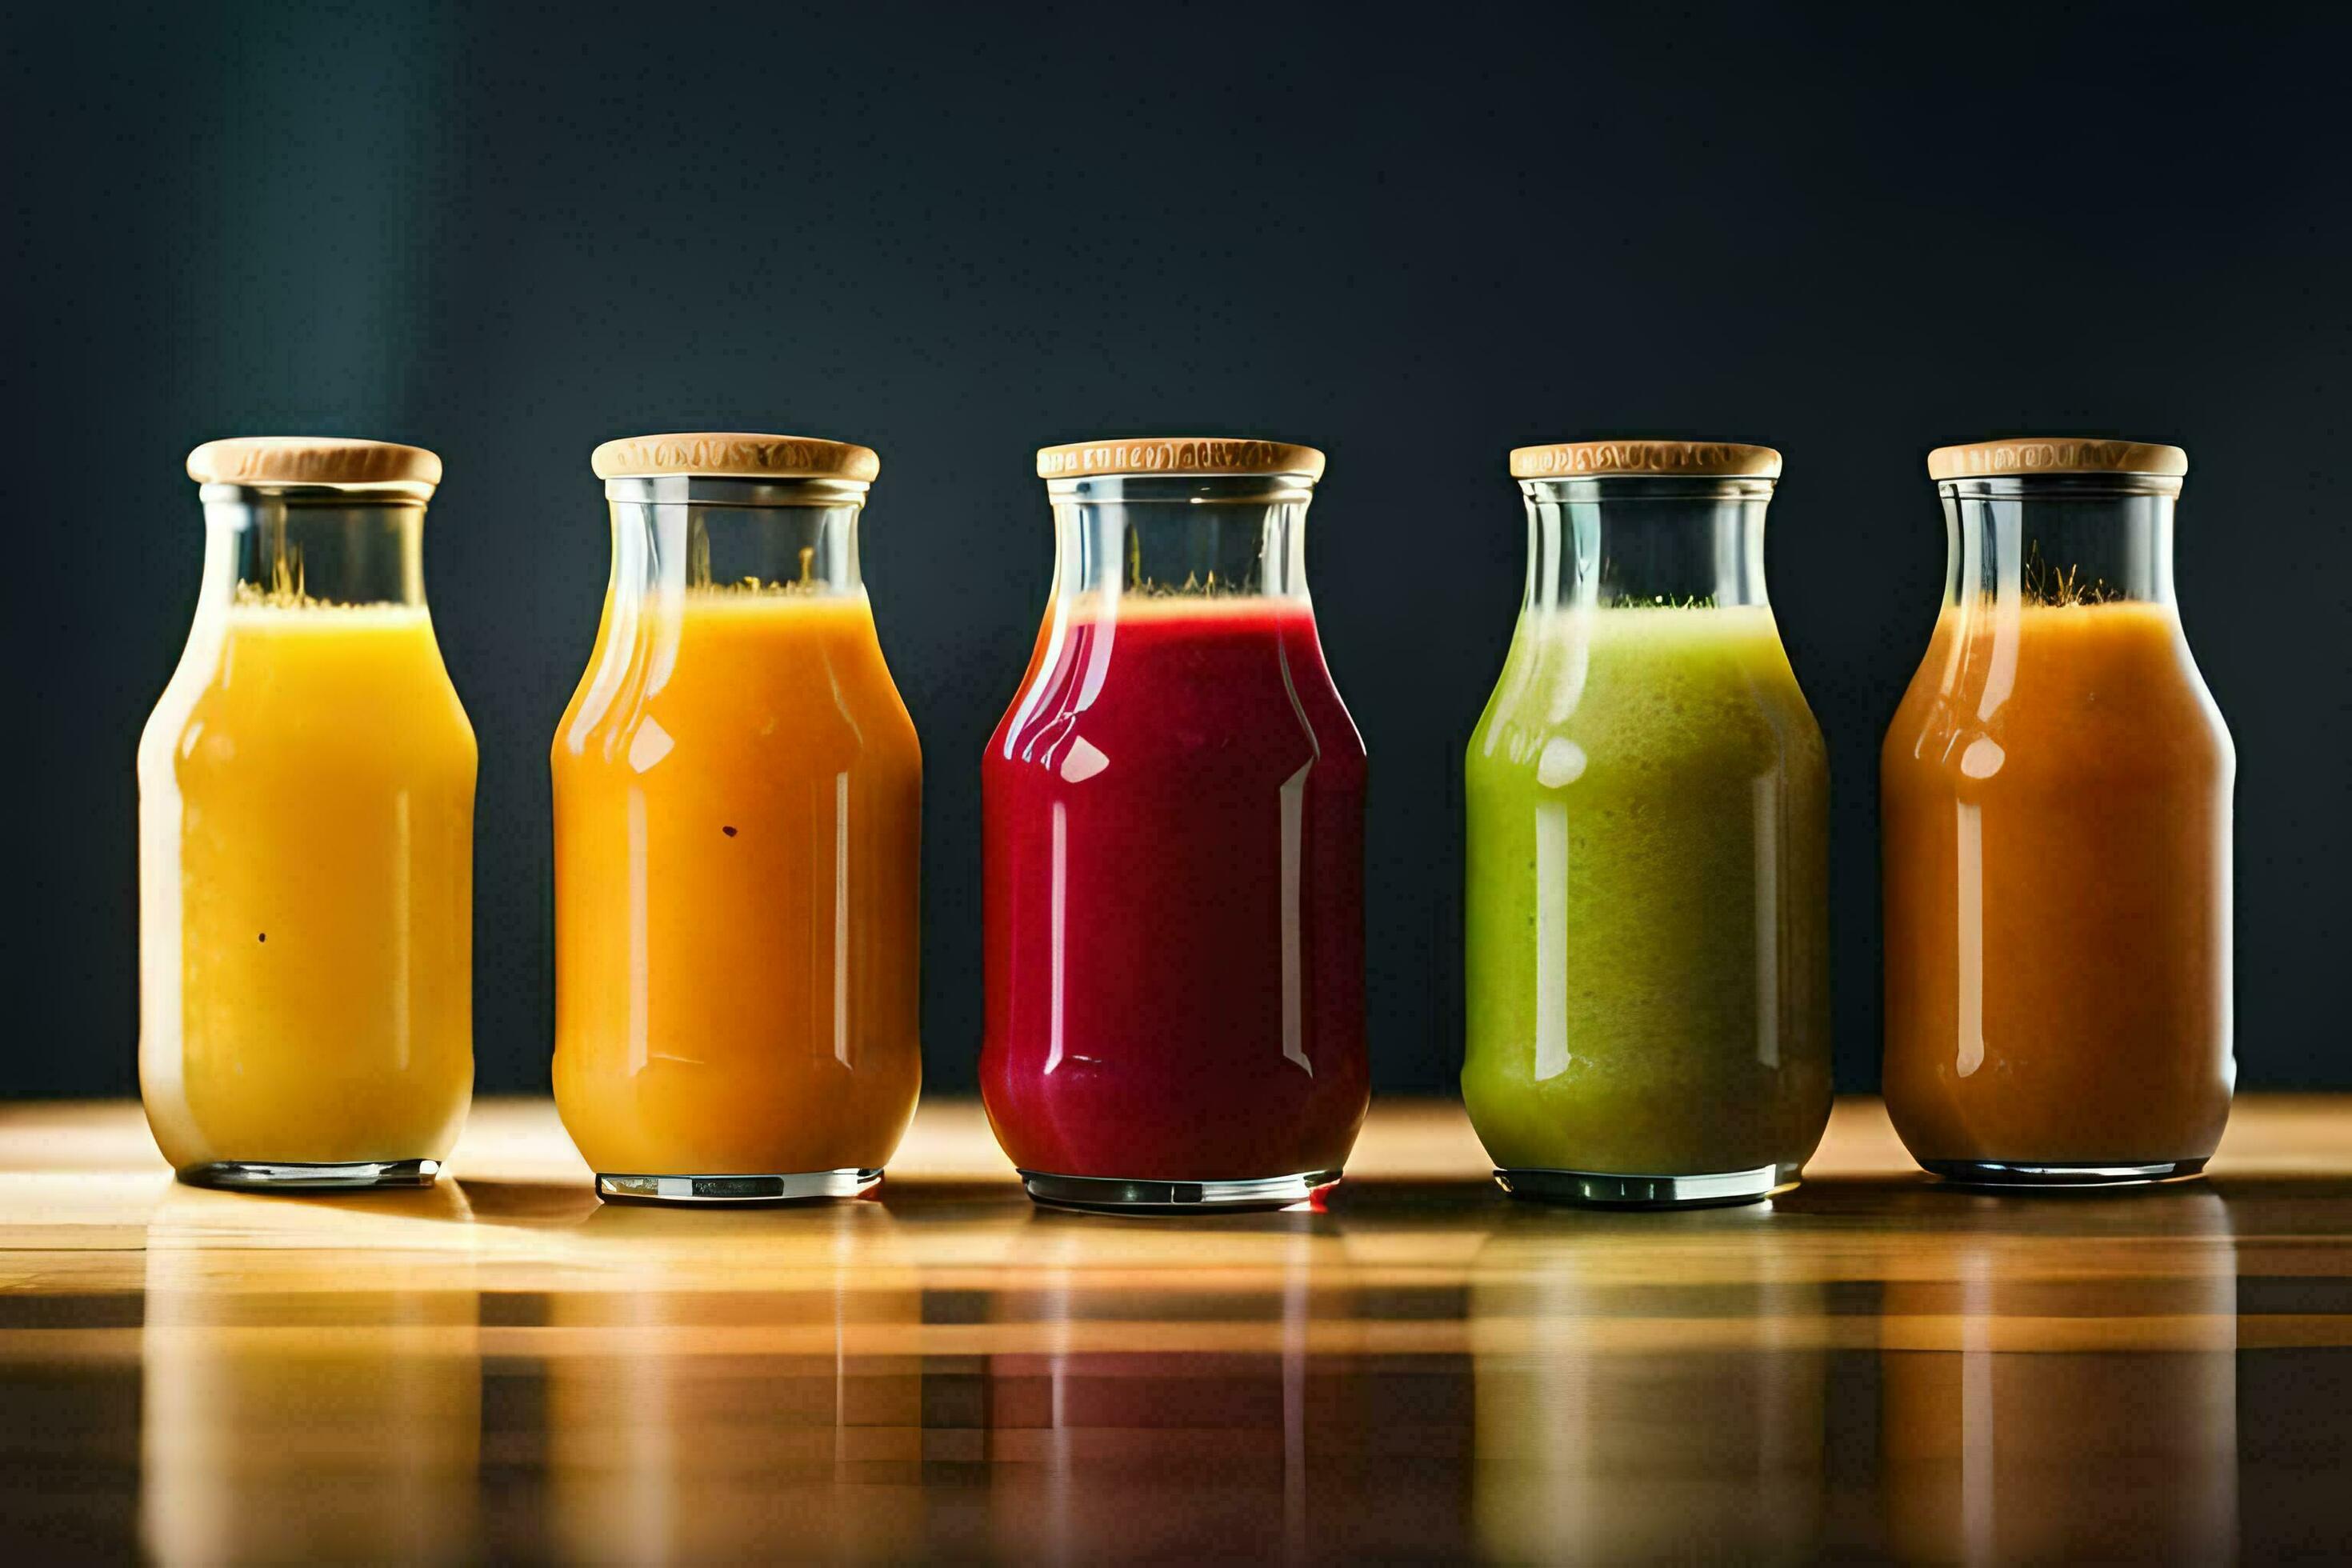 https://static.vecteezy.com/system/resources/previews/033/422/079/large_2x/five-different-types-of-juices-in-glass-bottles-ai-generated-free-photo.jpg